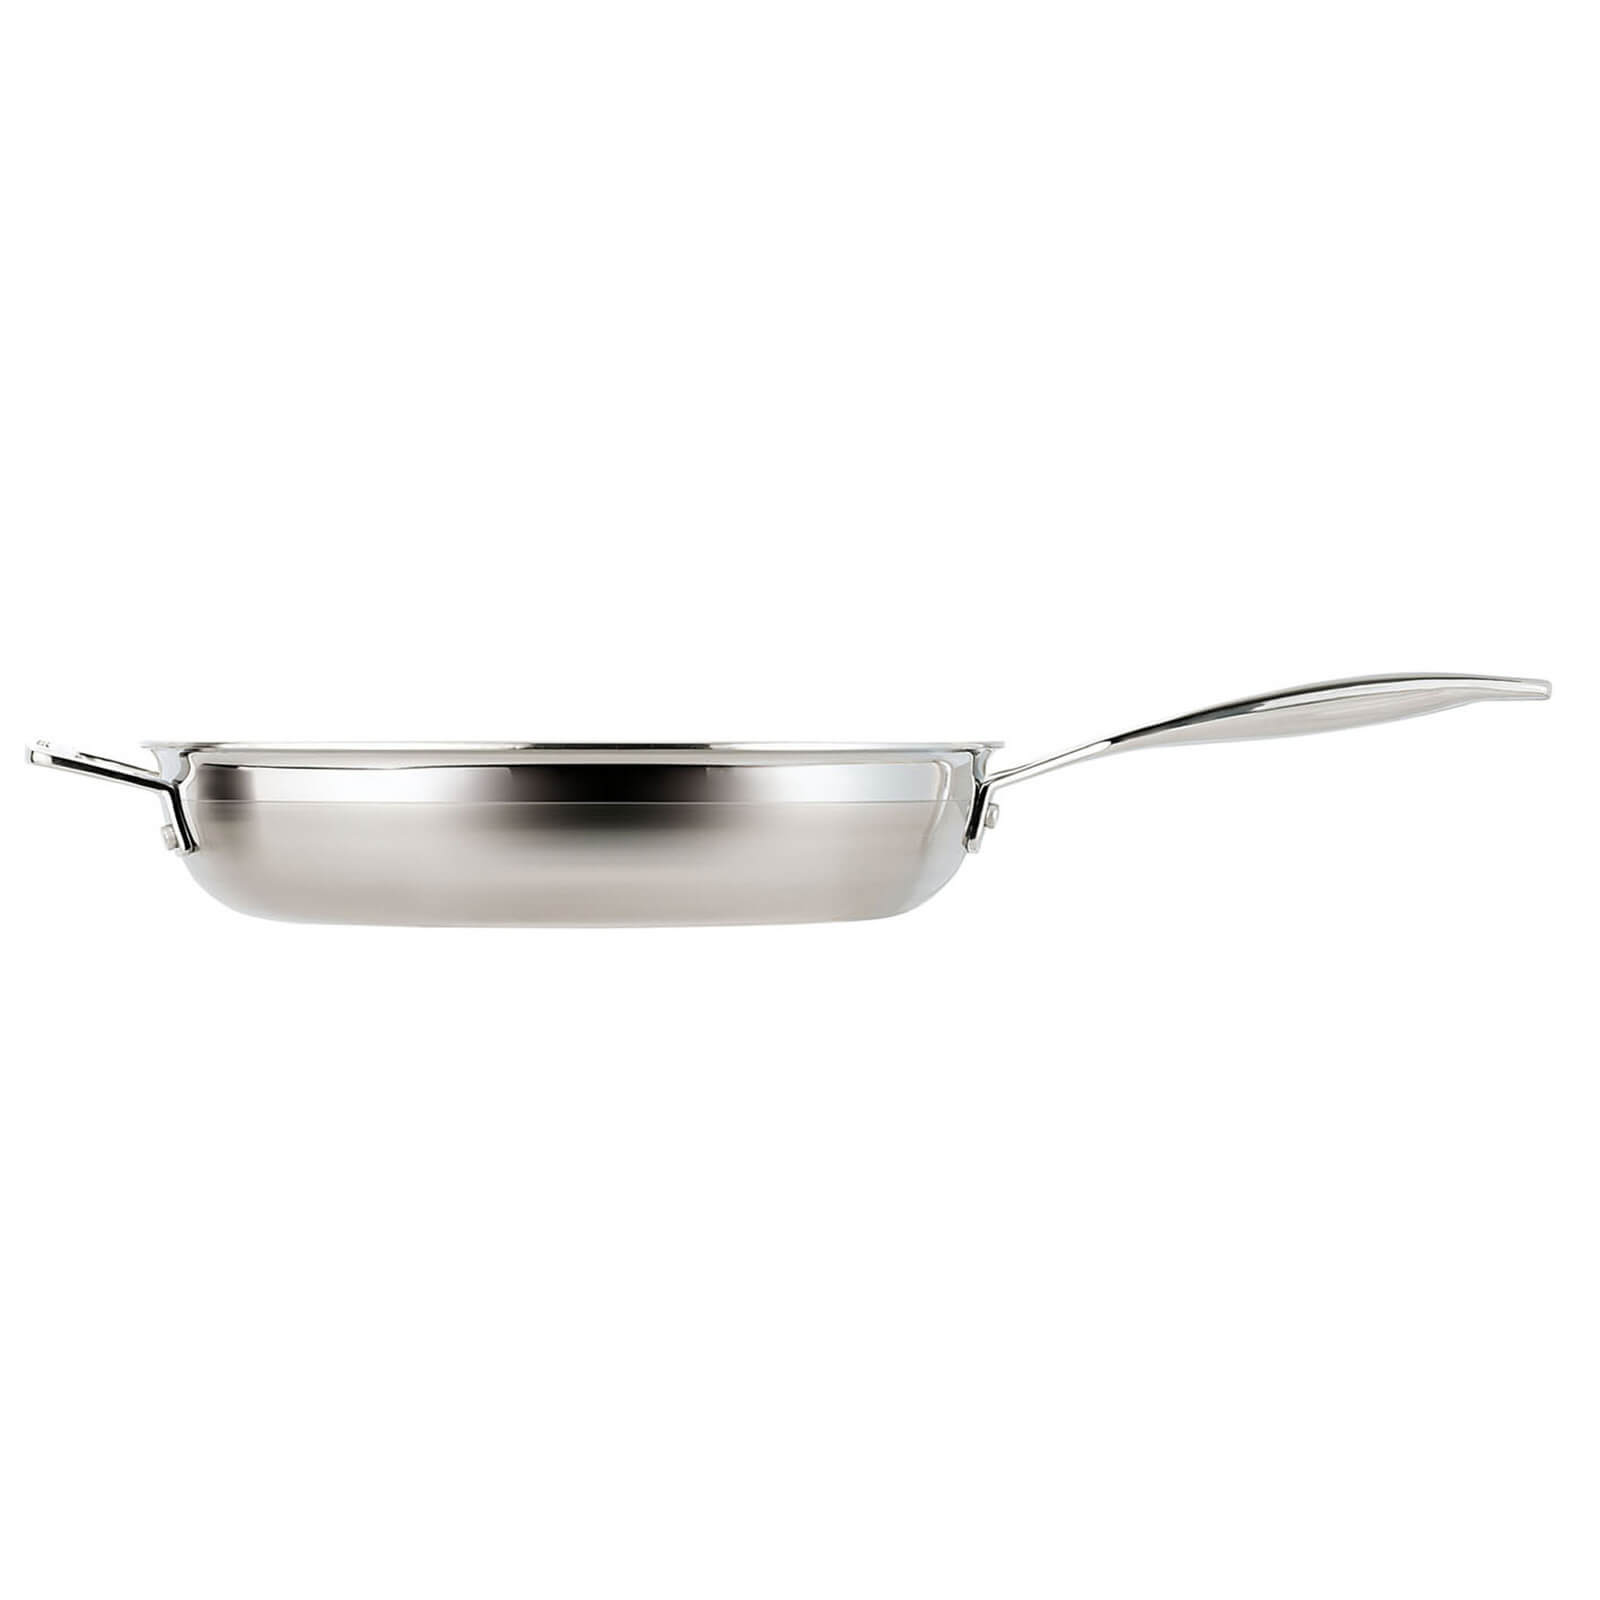 Le Creuset 3-Ply Stainless Steel 28Cm Non-Stick Frying Pan